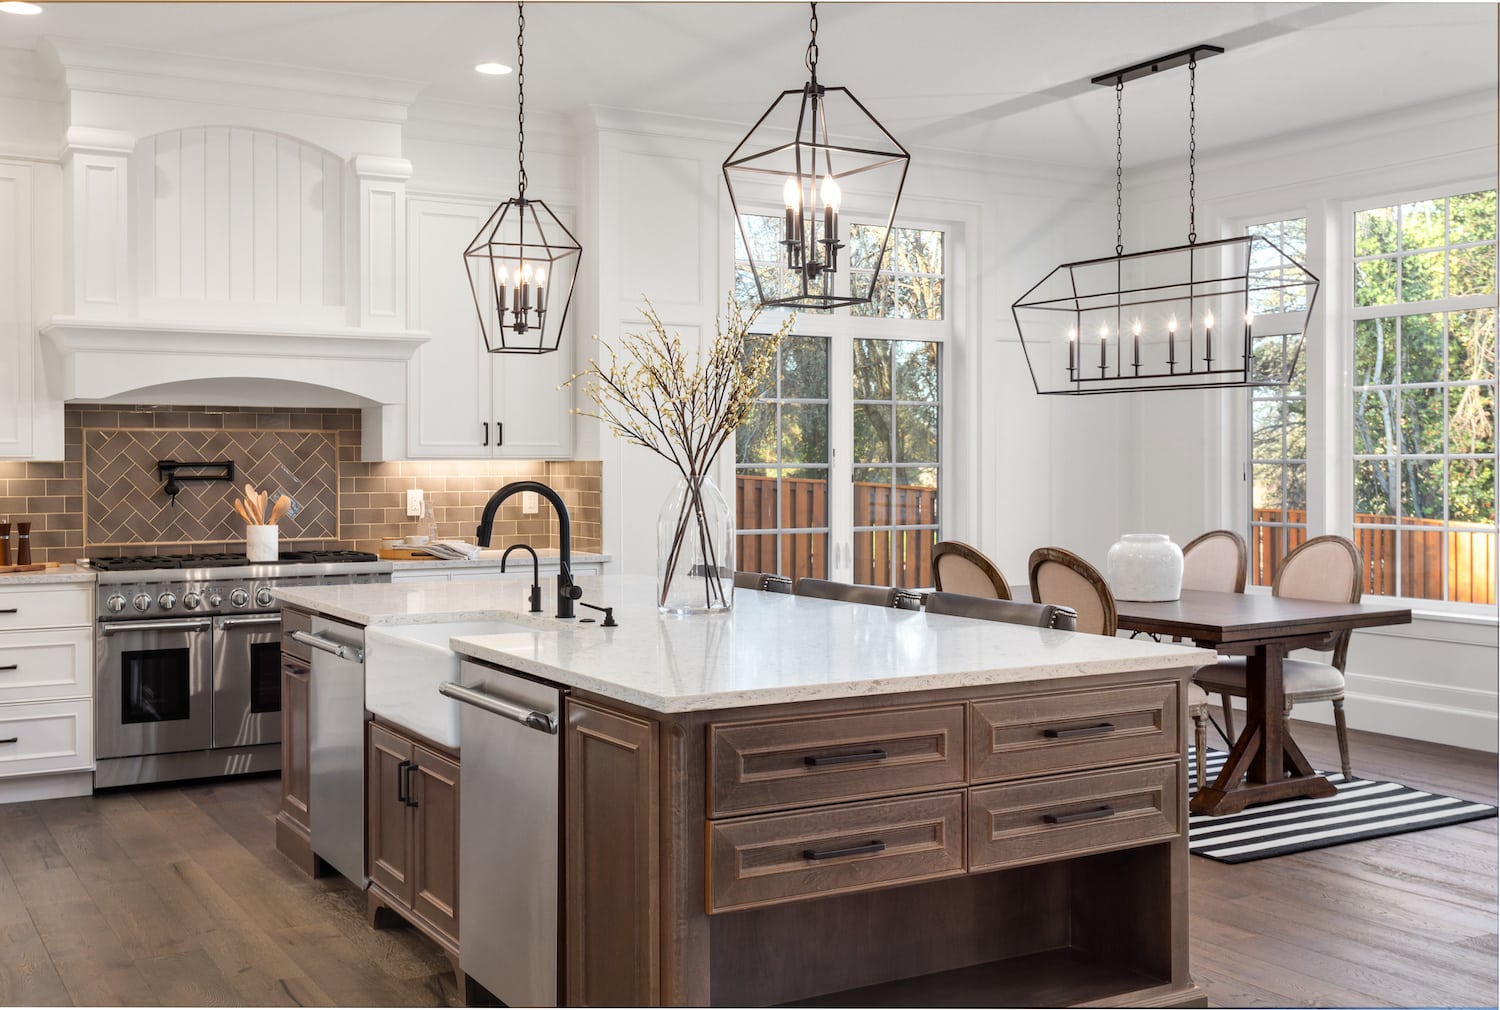 A kitchen with white cabinets and a center island designed by Clive.